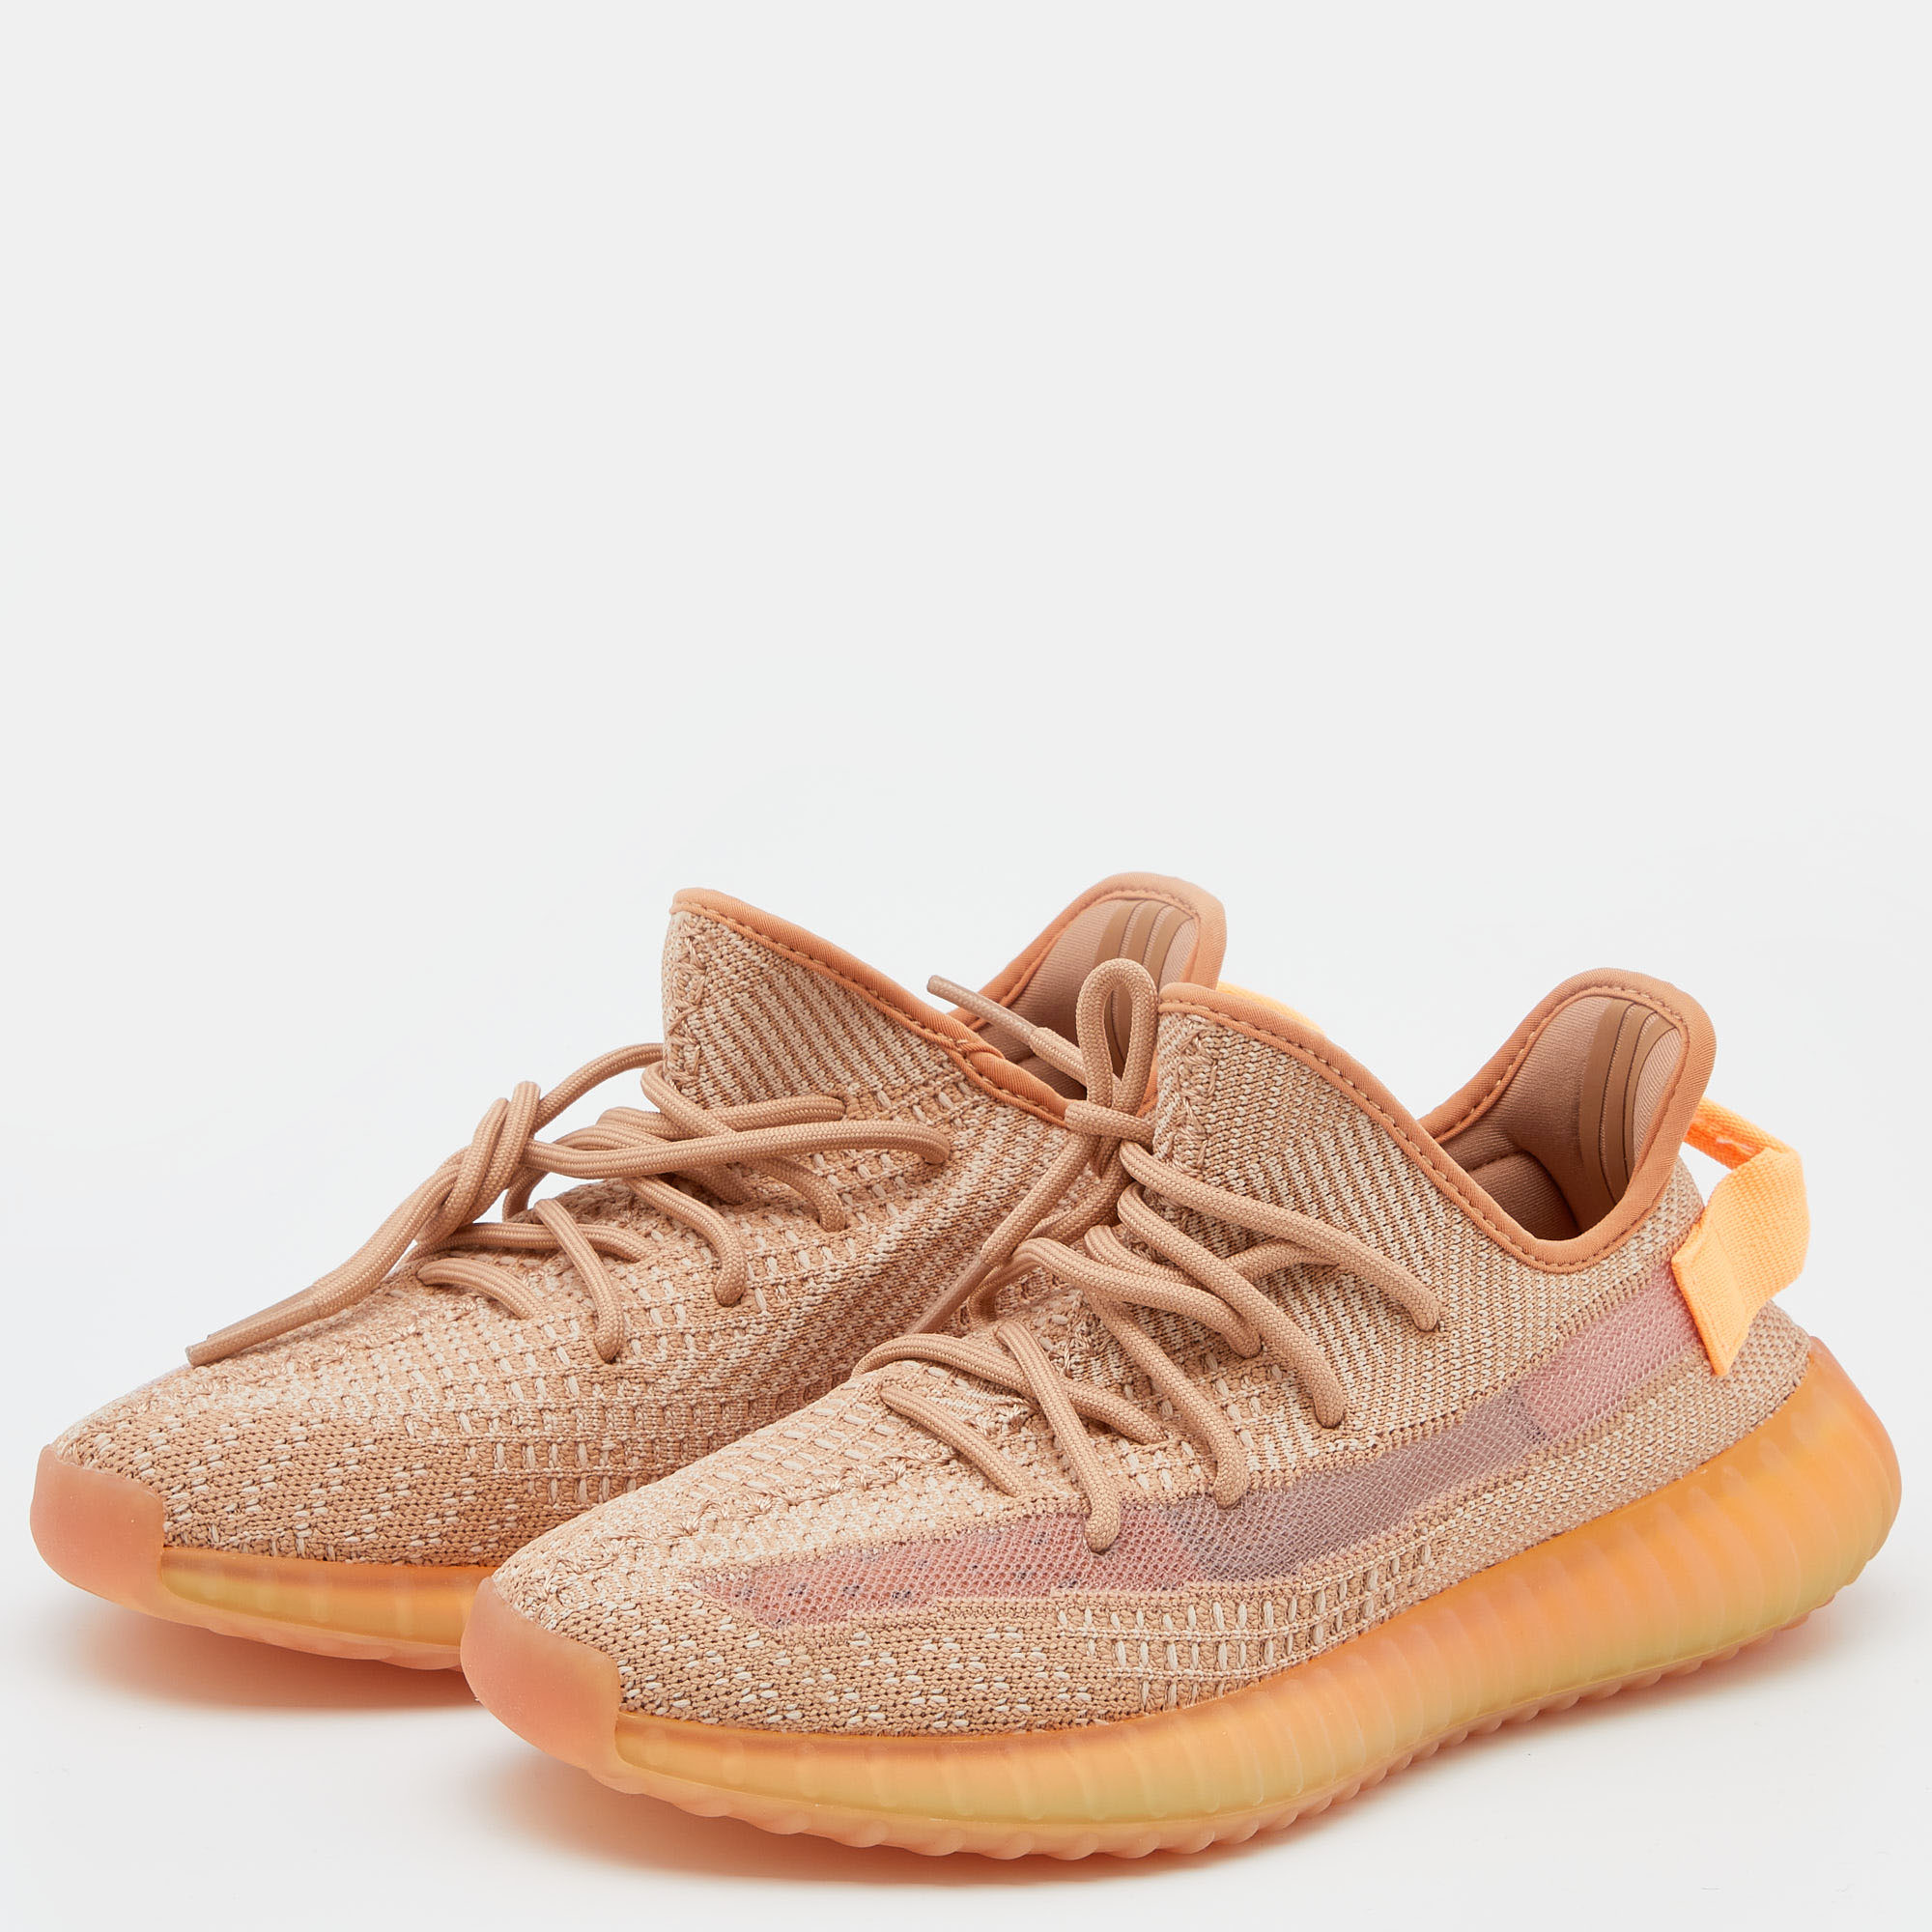 

Yeezy x Adidas Brown Knit Fabric Boost 350 V2 Clay Sneakers Size  1/3